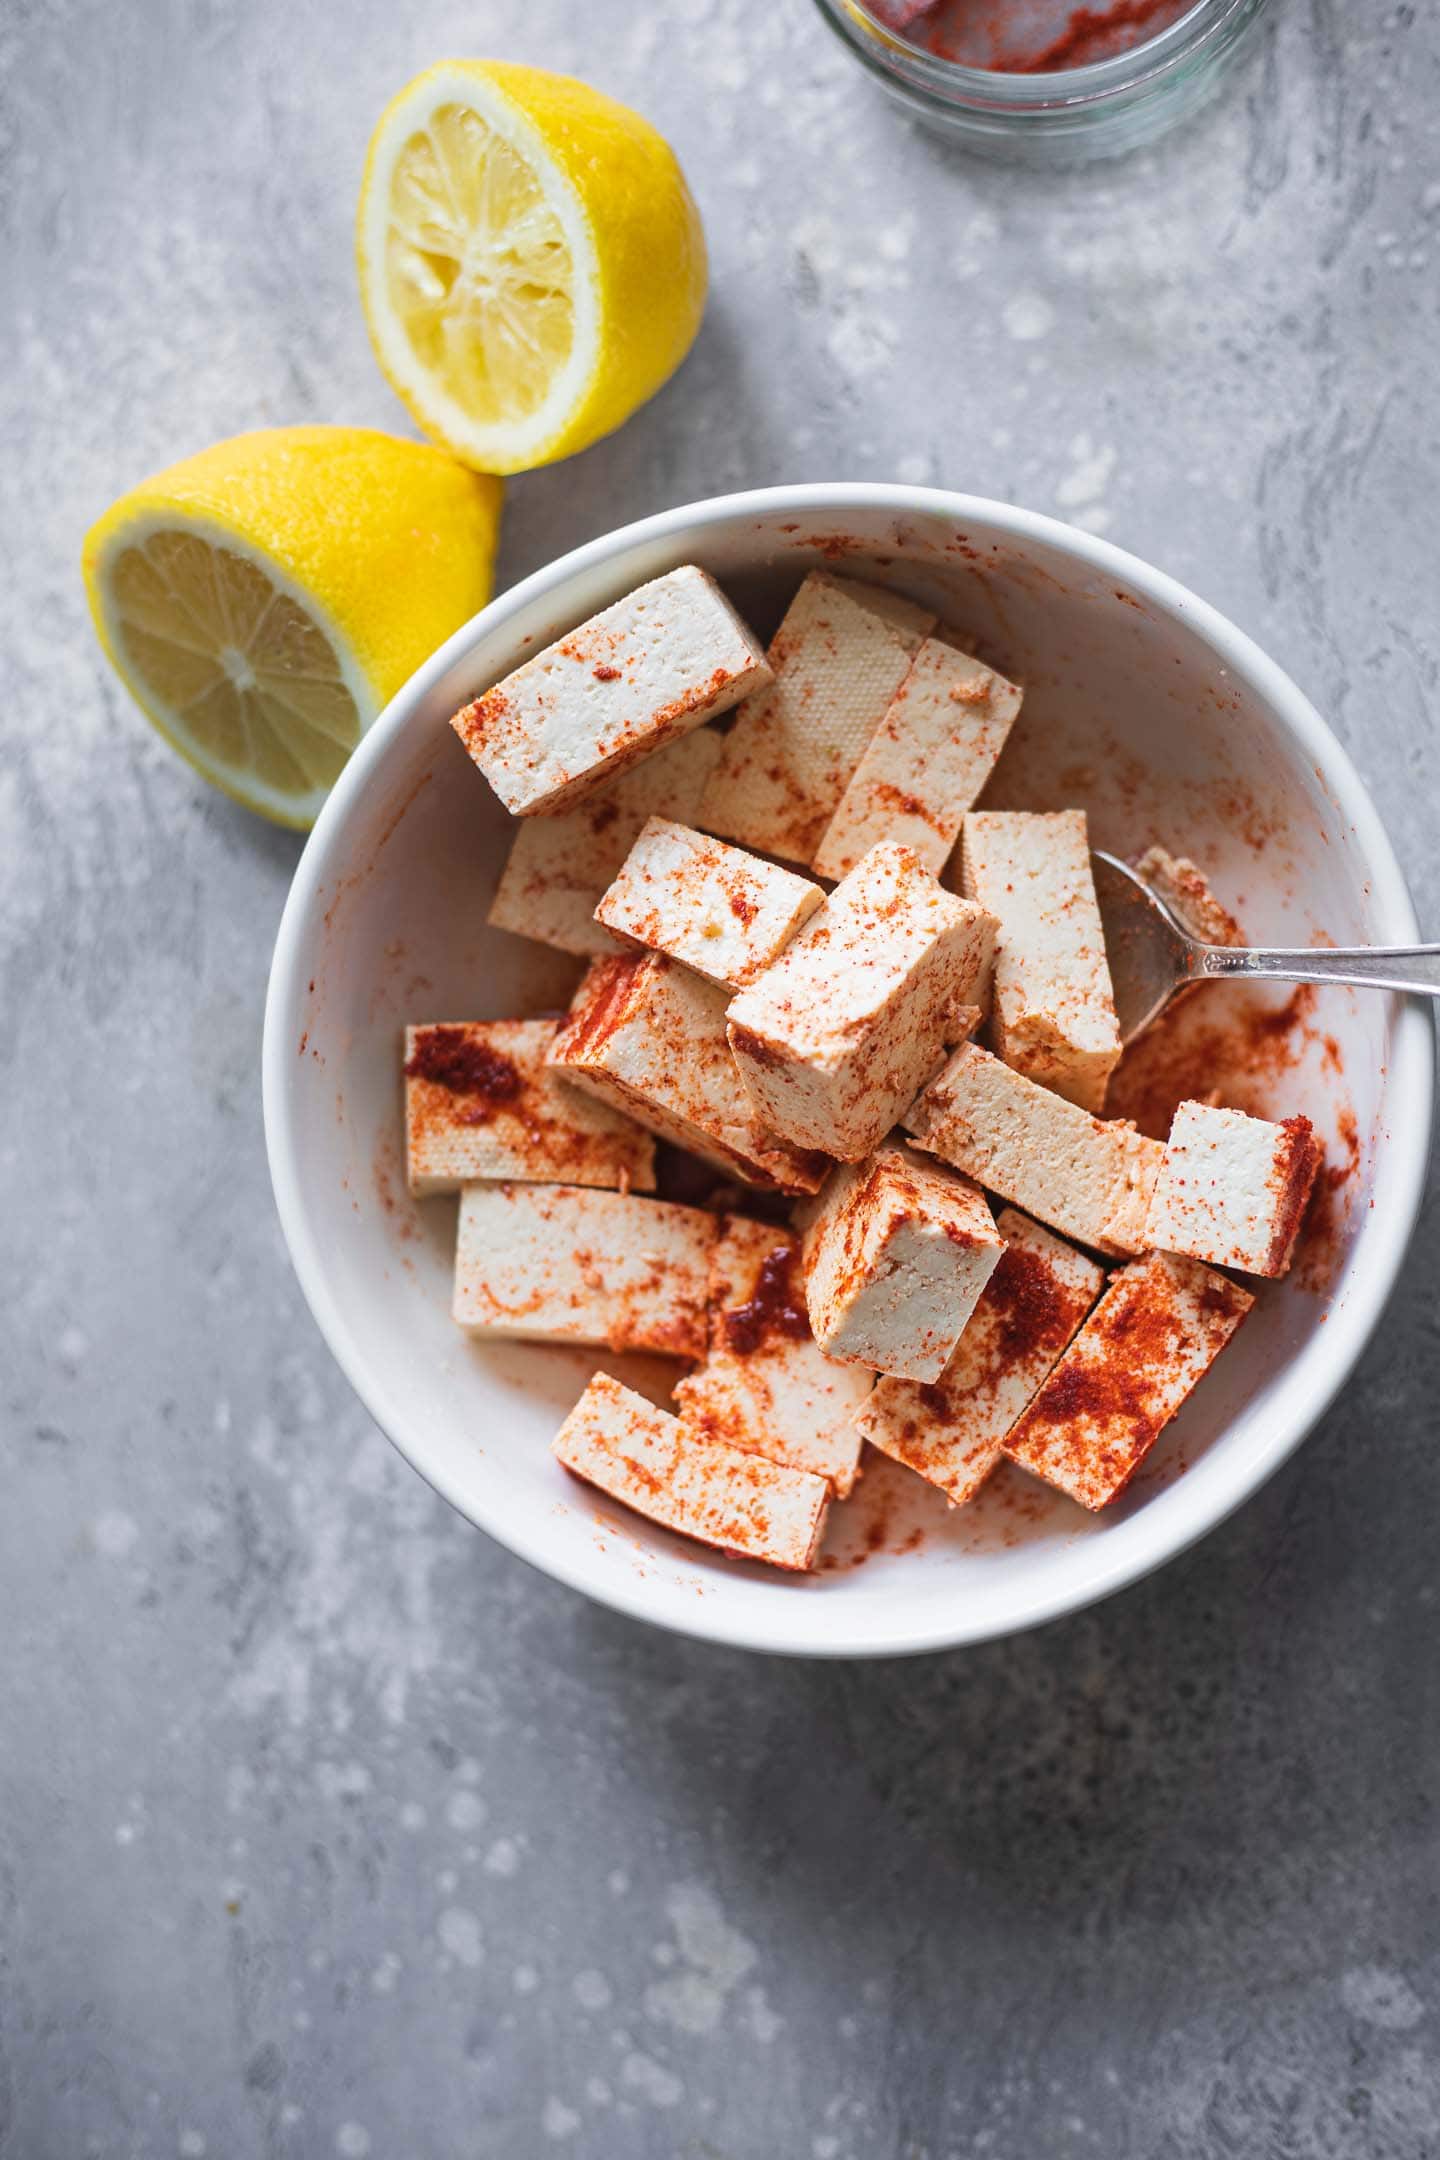 Tofu and spices in a bowl